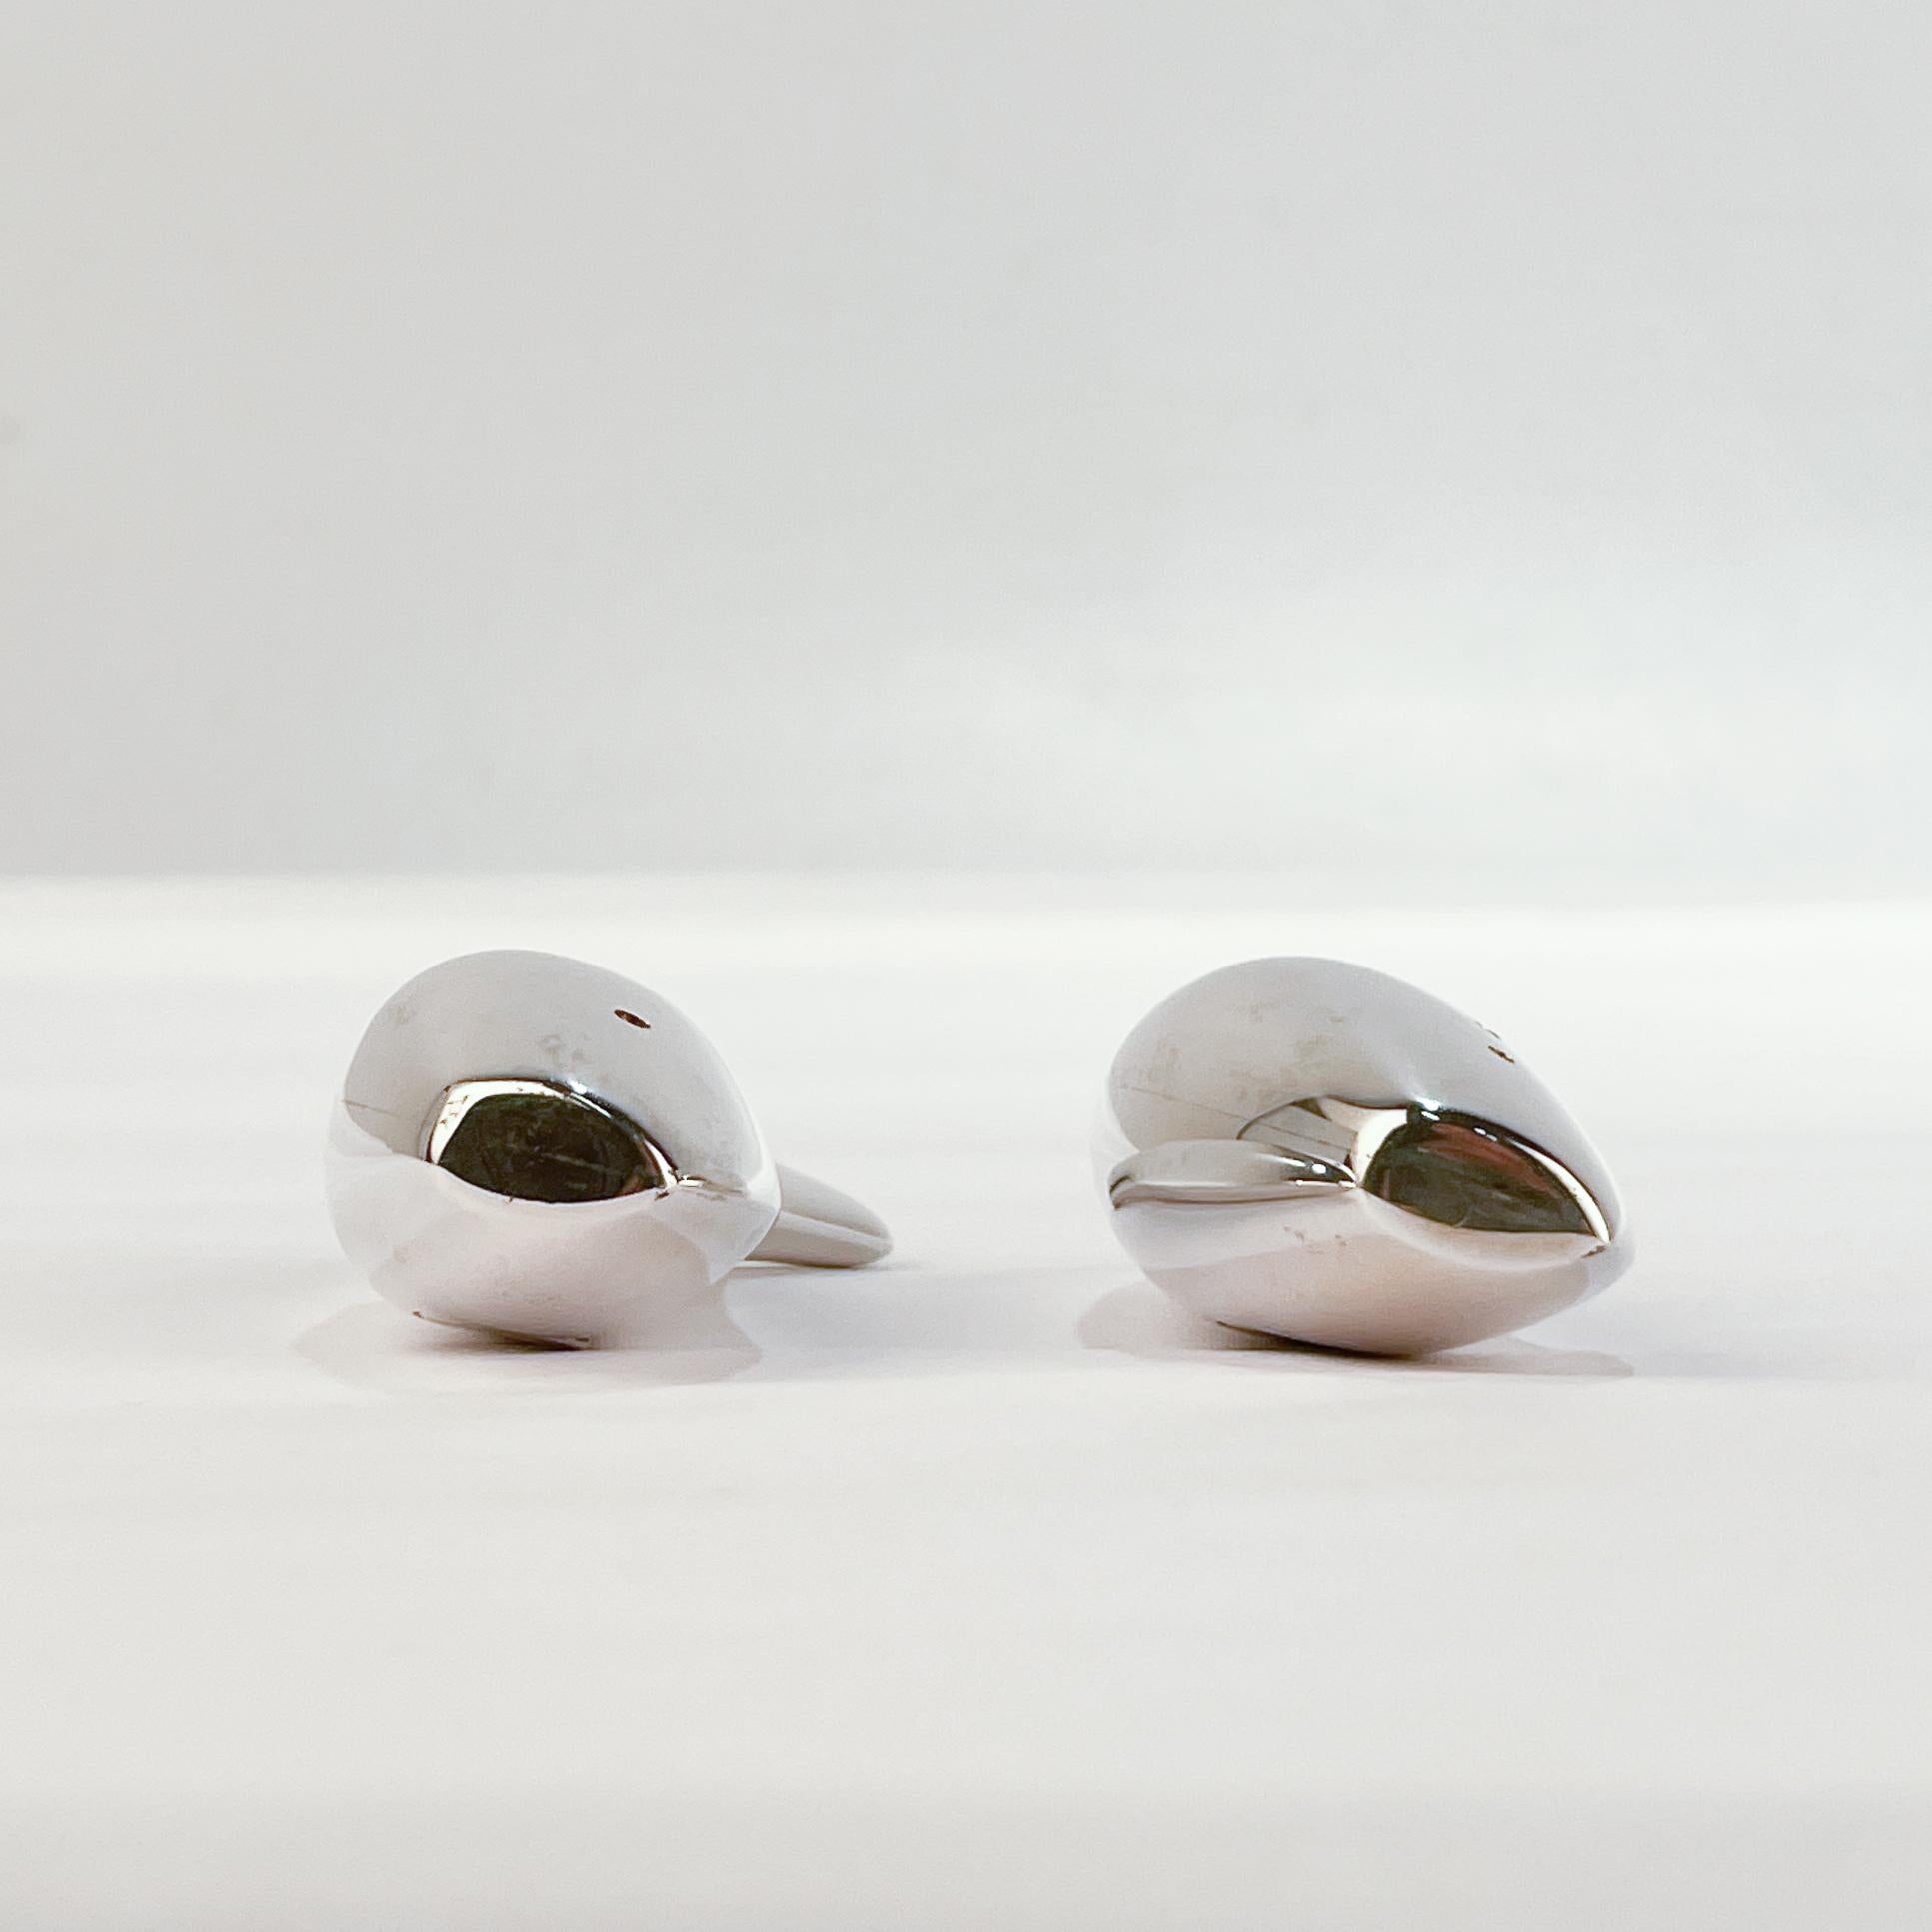 Modern Tiffany & Co. Sterling Silver 'Fish' Salt & Pepper Shakers by Frank Gehry